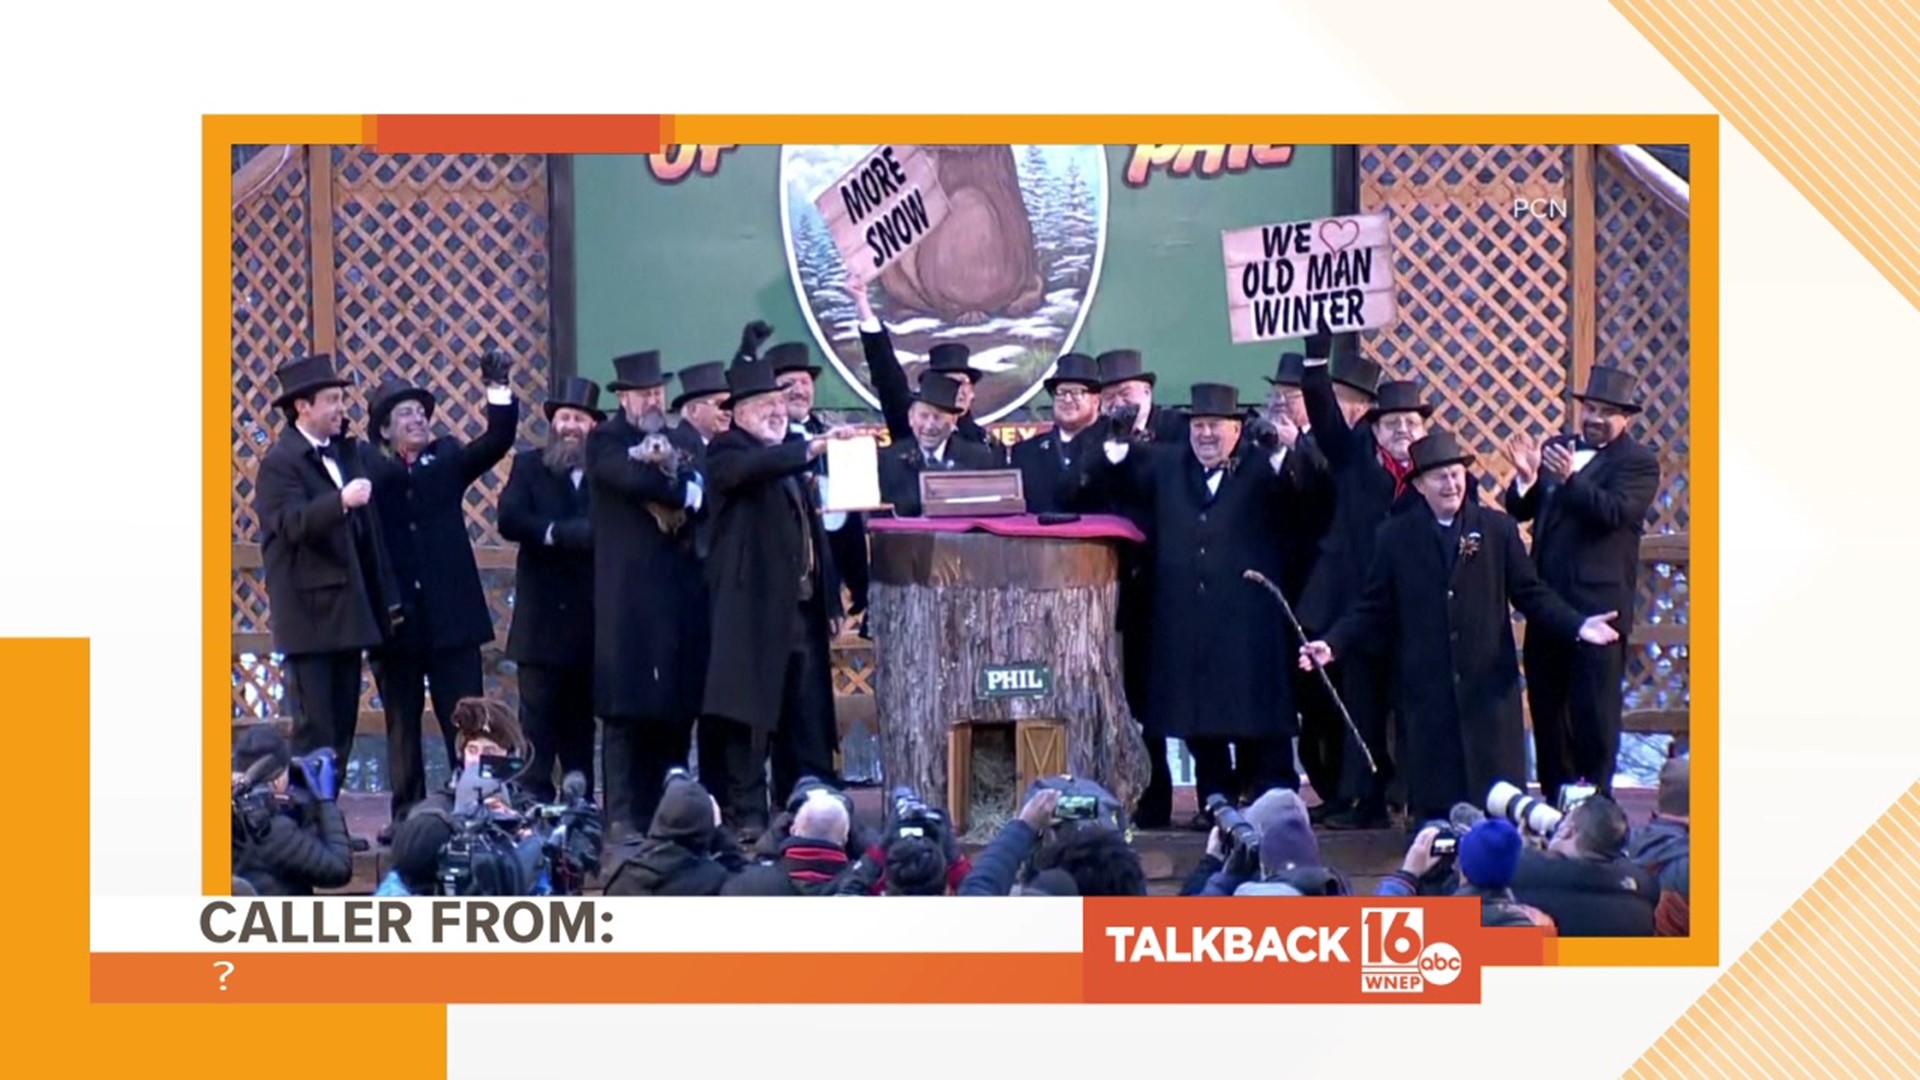 Talkback is once again full of calls about Punxsutawney Phil.